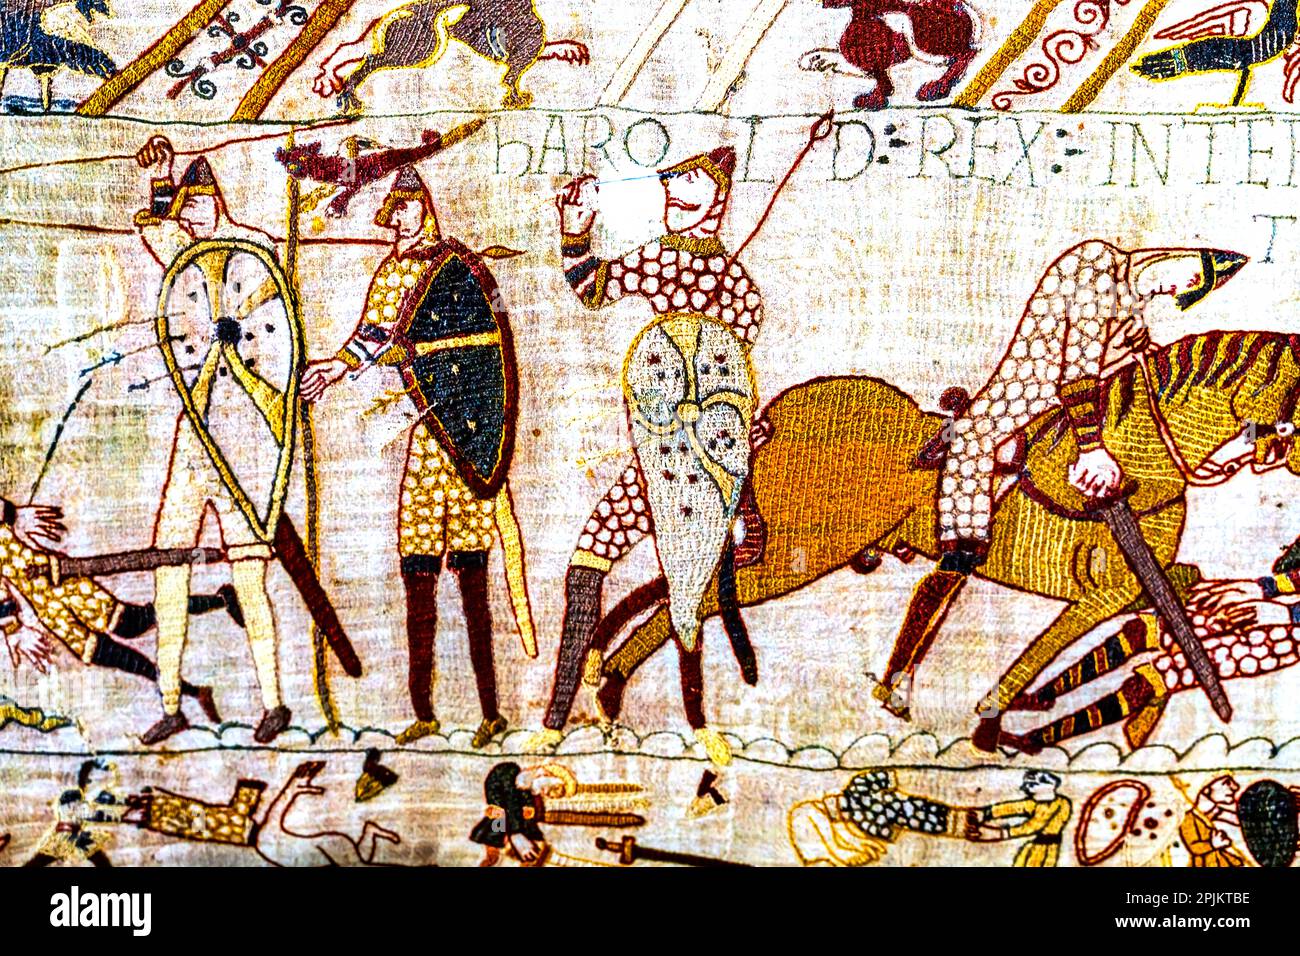 Bayeux tapestry, Bayeux, Normandy, France. Created 11th century right after Battle of Hastings 1066 AD showing Norman Conquest. Death of King Harold. Stock Photo